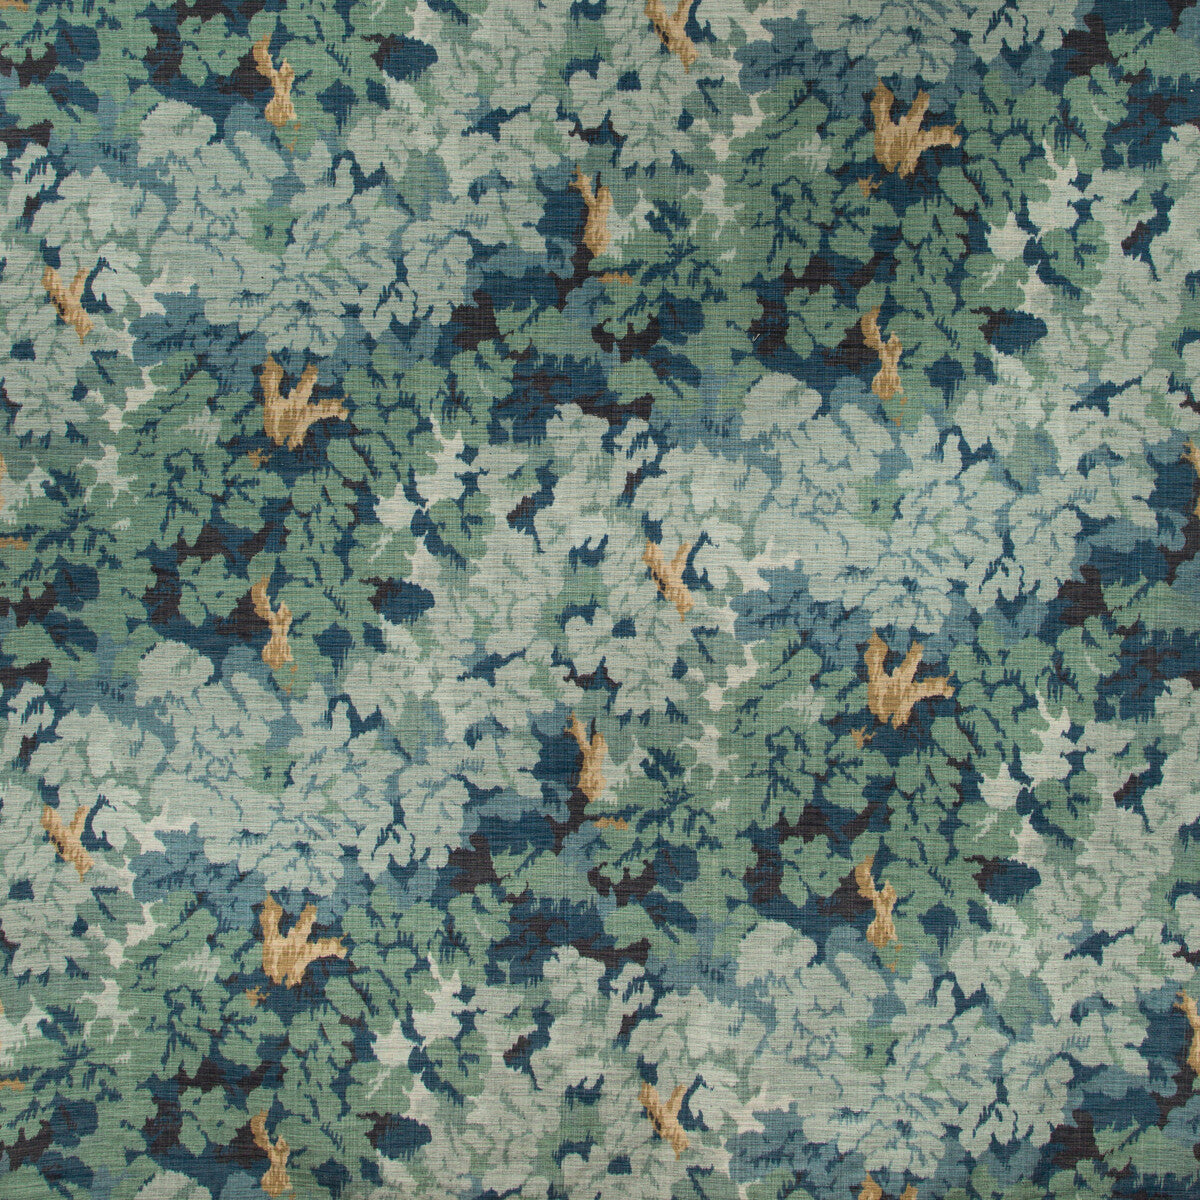 Arley Print fabric in lagoon color - pattern 2019101.313.0 - by Lee Jofa in the Manor House collection